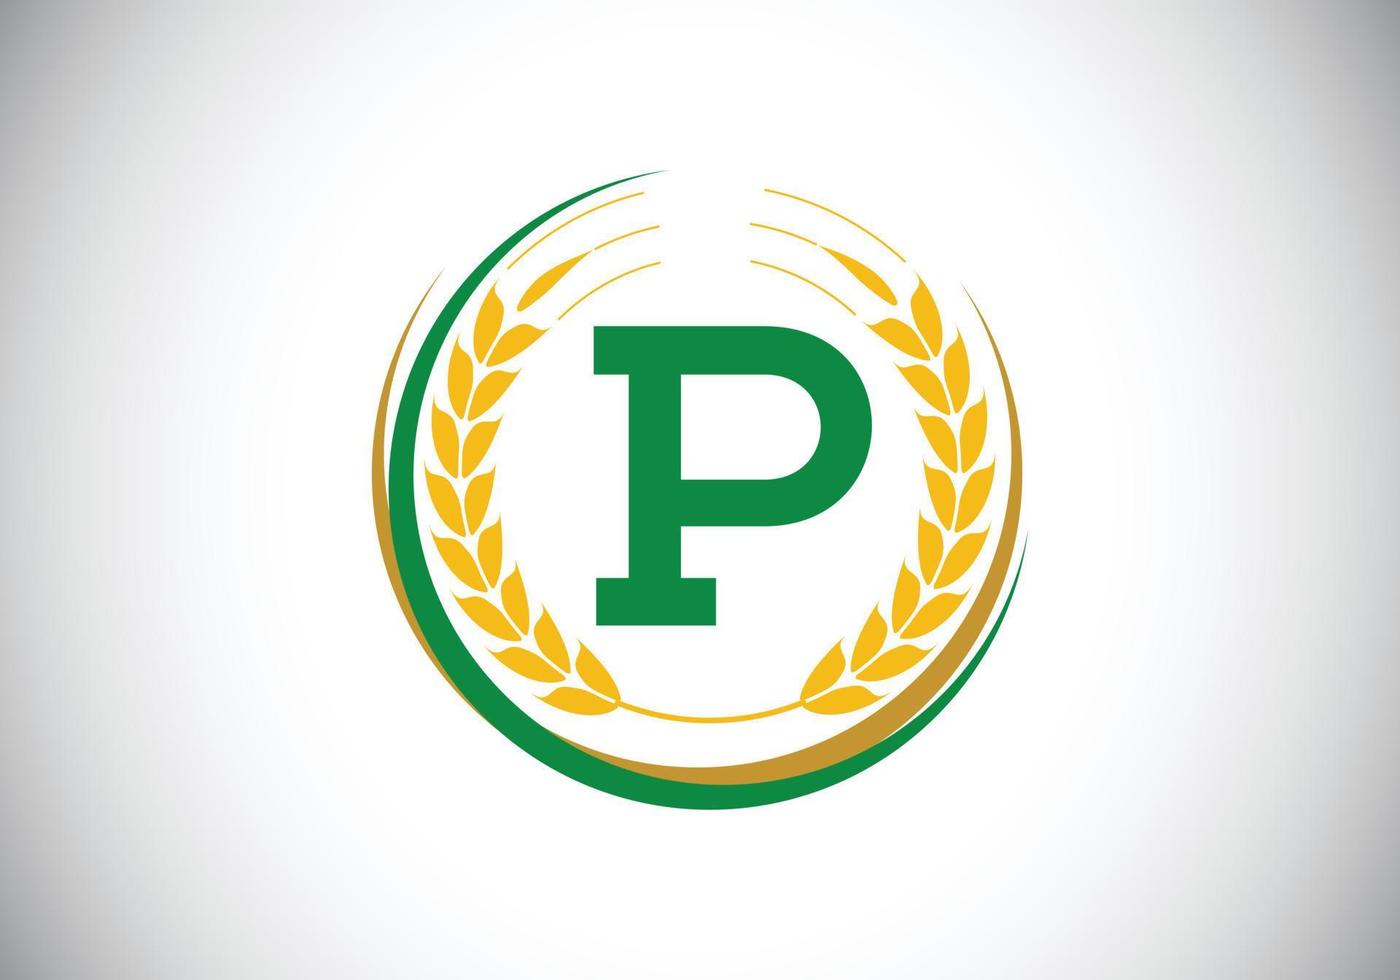 Initial letter P sign symbol with wheat ears wreath. Organic wheat farming logo design concept. Agriculture logo design vector template.